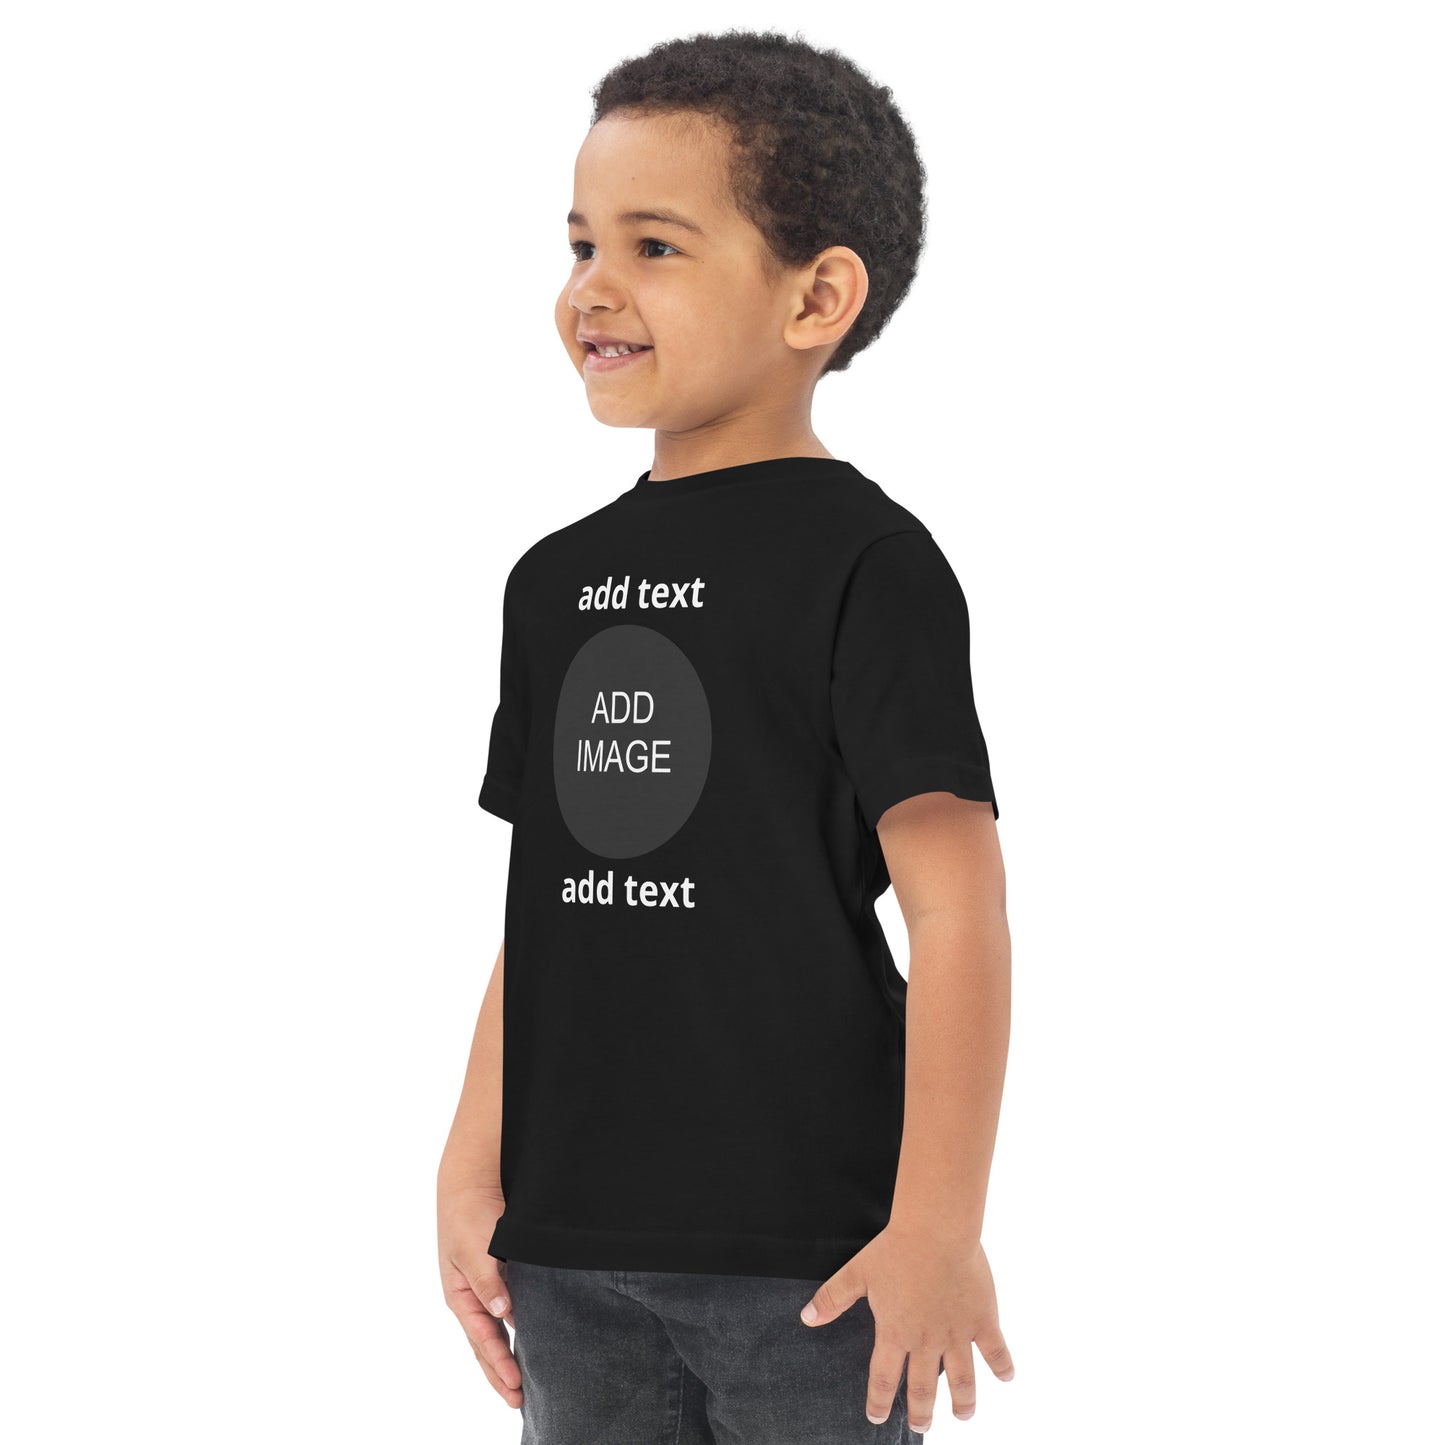 Toddler Jersey Unisex [front image and text]